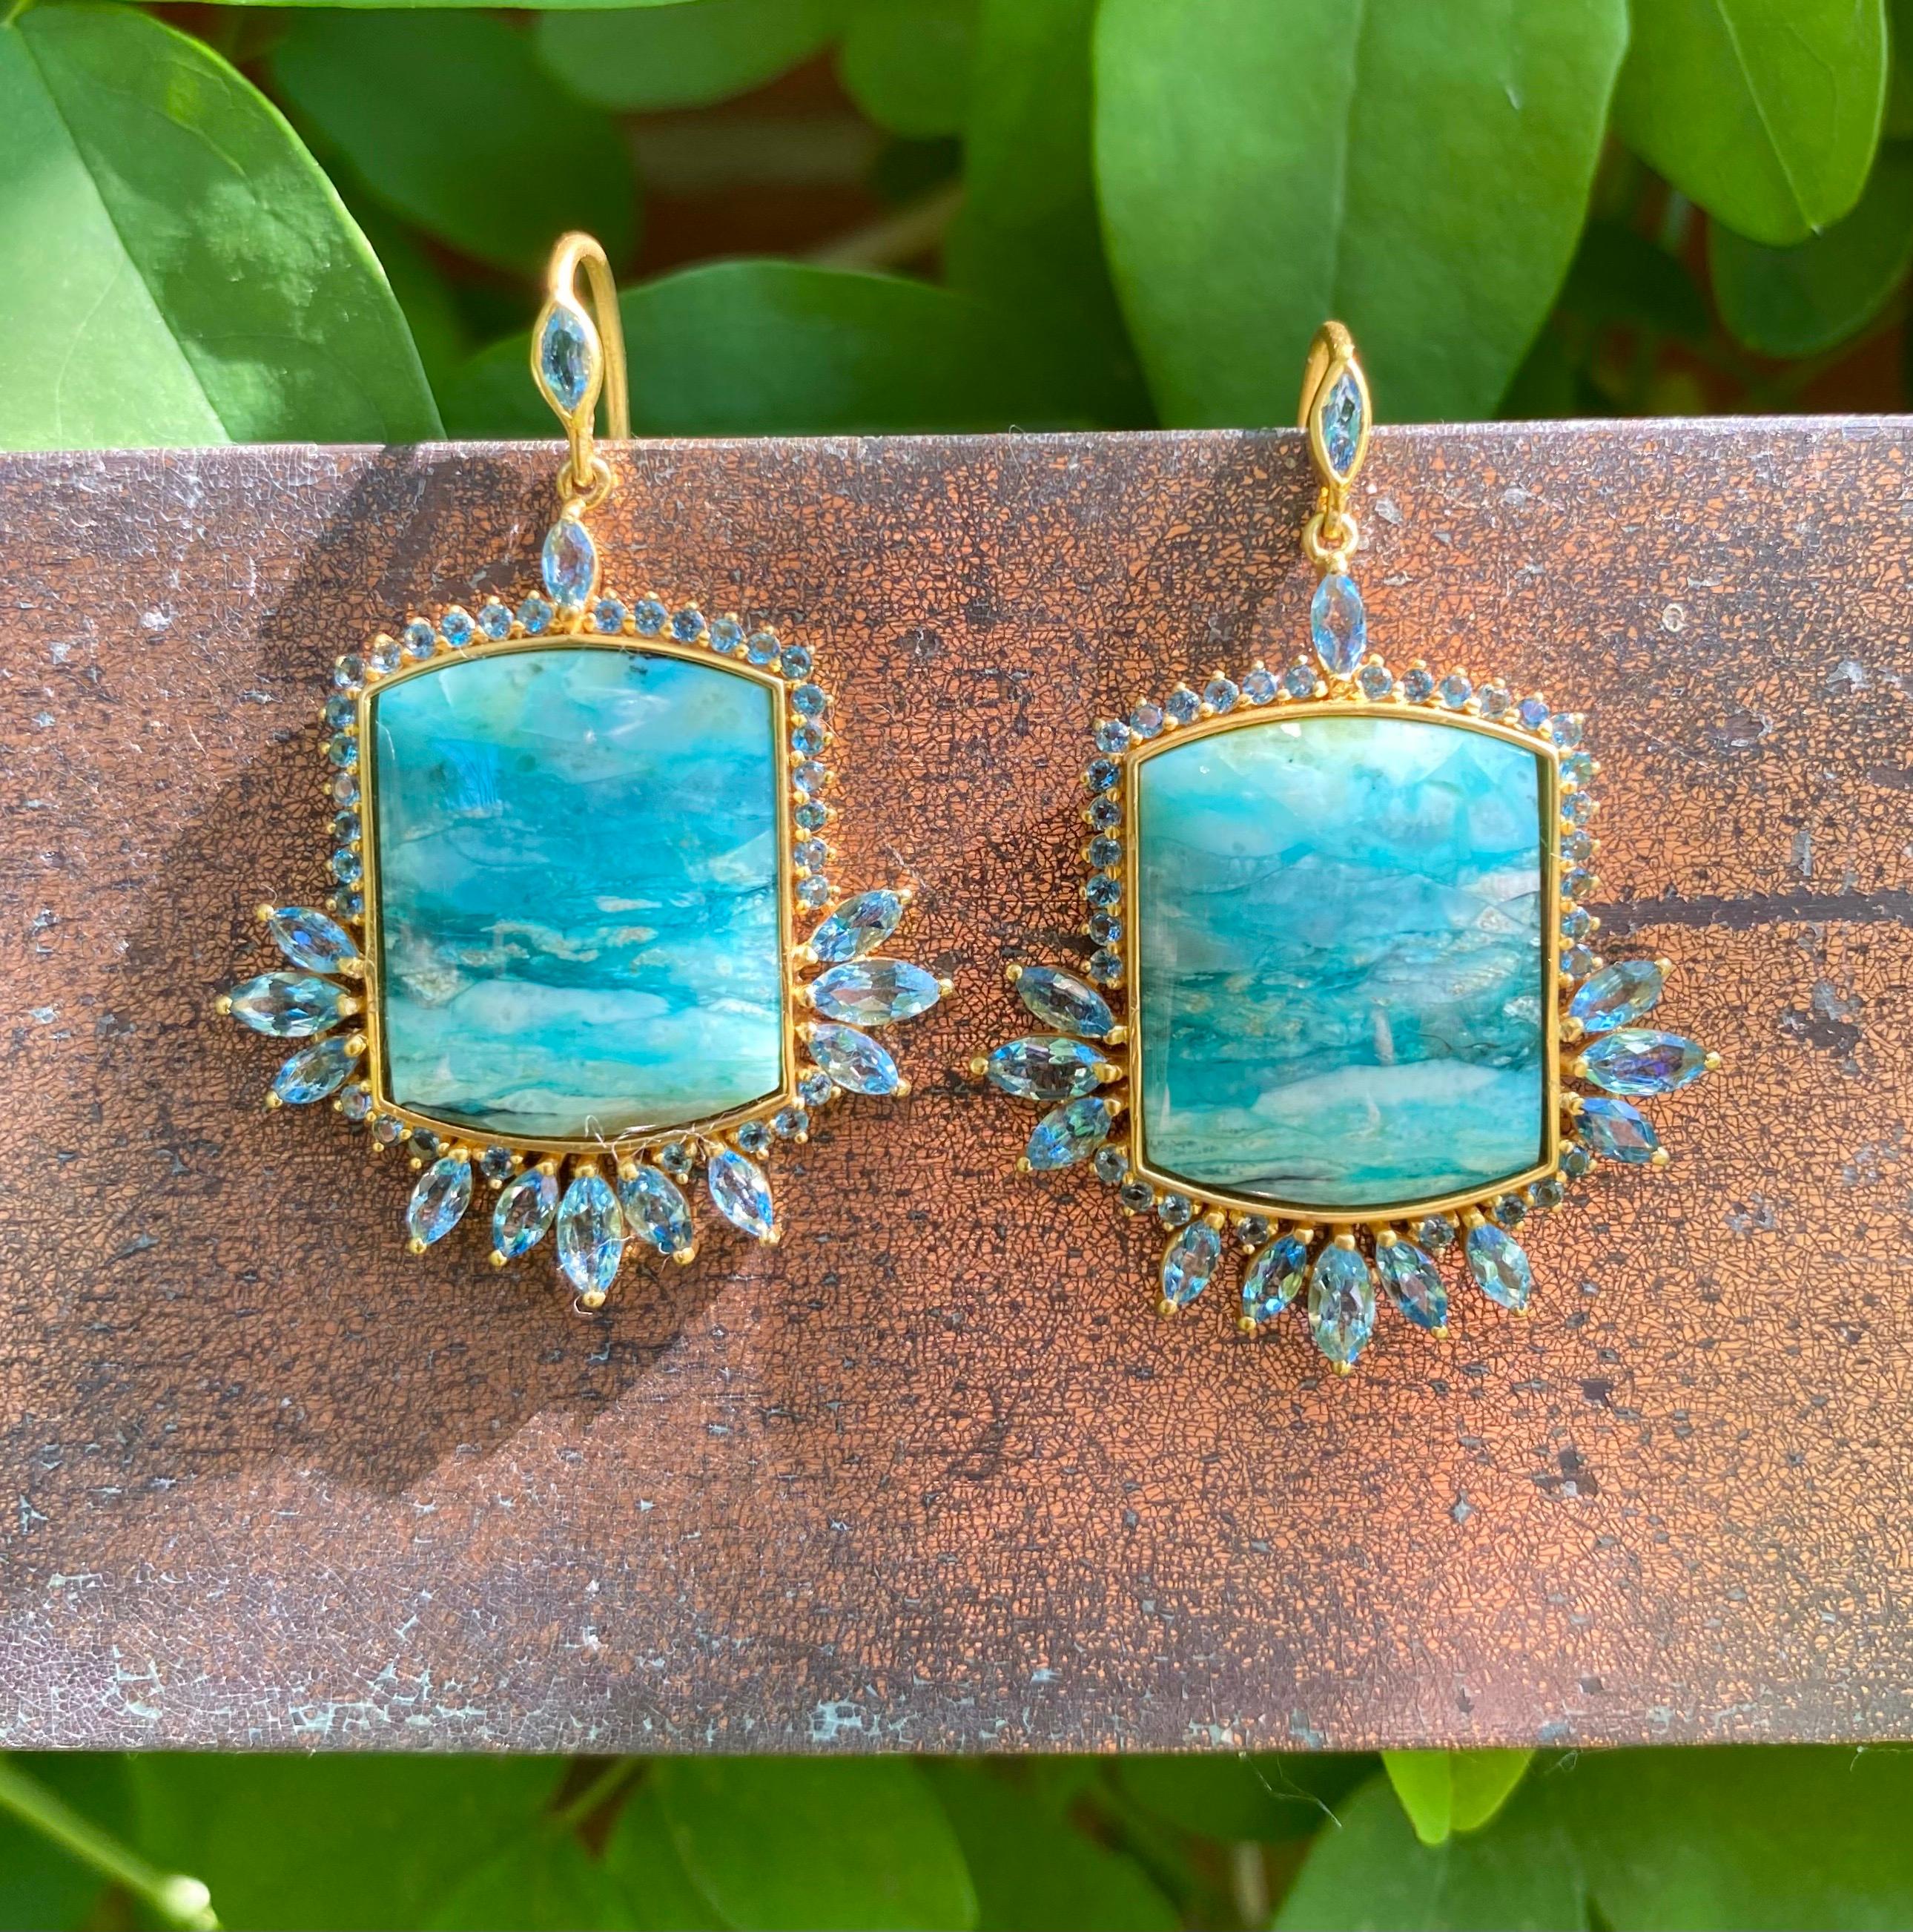 Designed by award winning jewelry designer, Lauren Harper, these fossilized opalized wood and aquamarine earrings are a one of a kind. Set in a warm 18kt Gold alloy, these hand made earrings embody ocean blues and are sure to get you noticed.